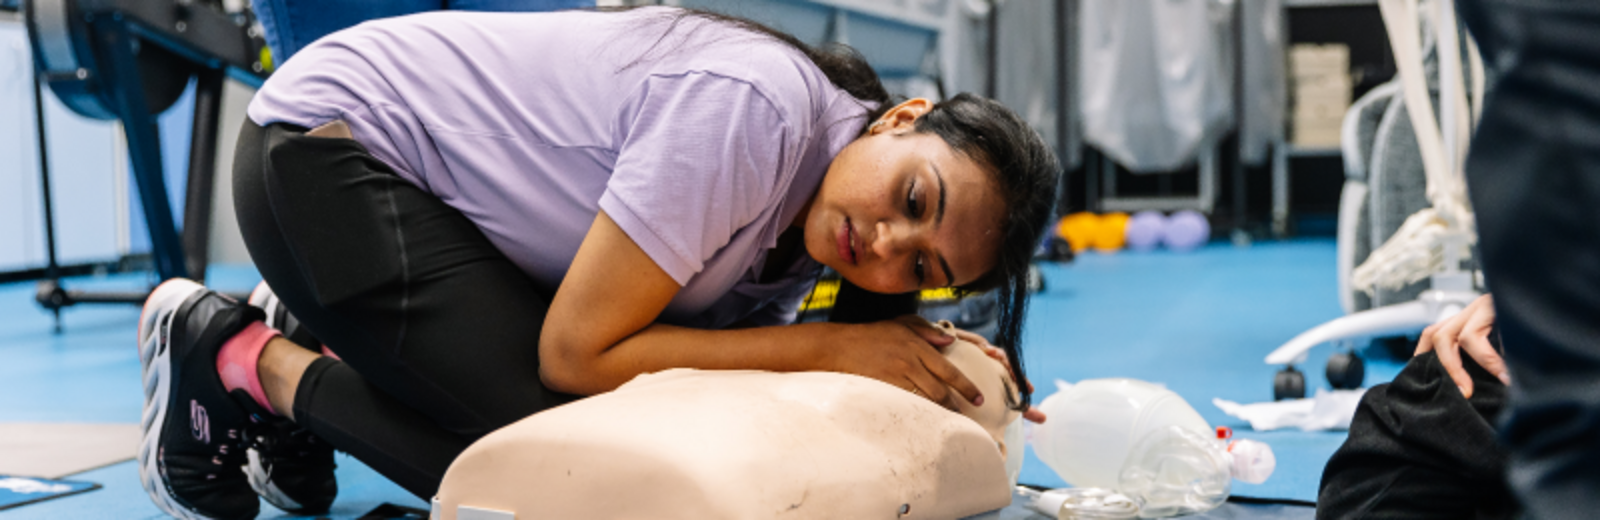 Student offering first aid to model